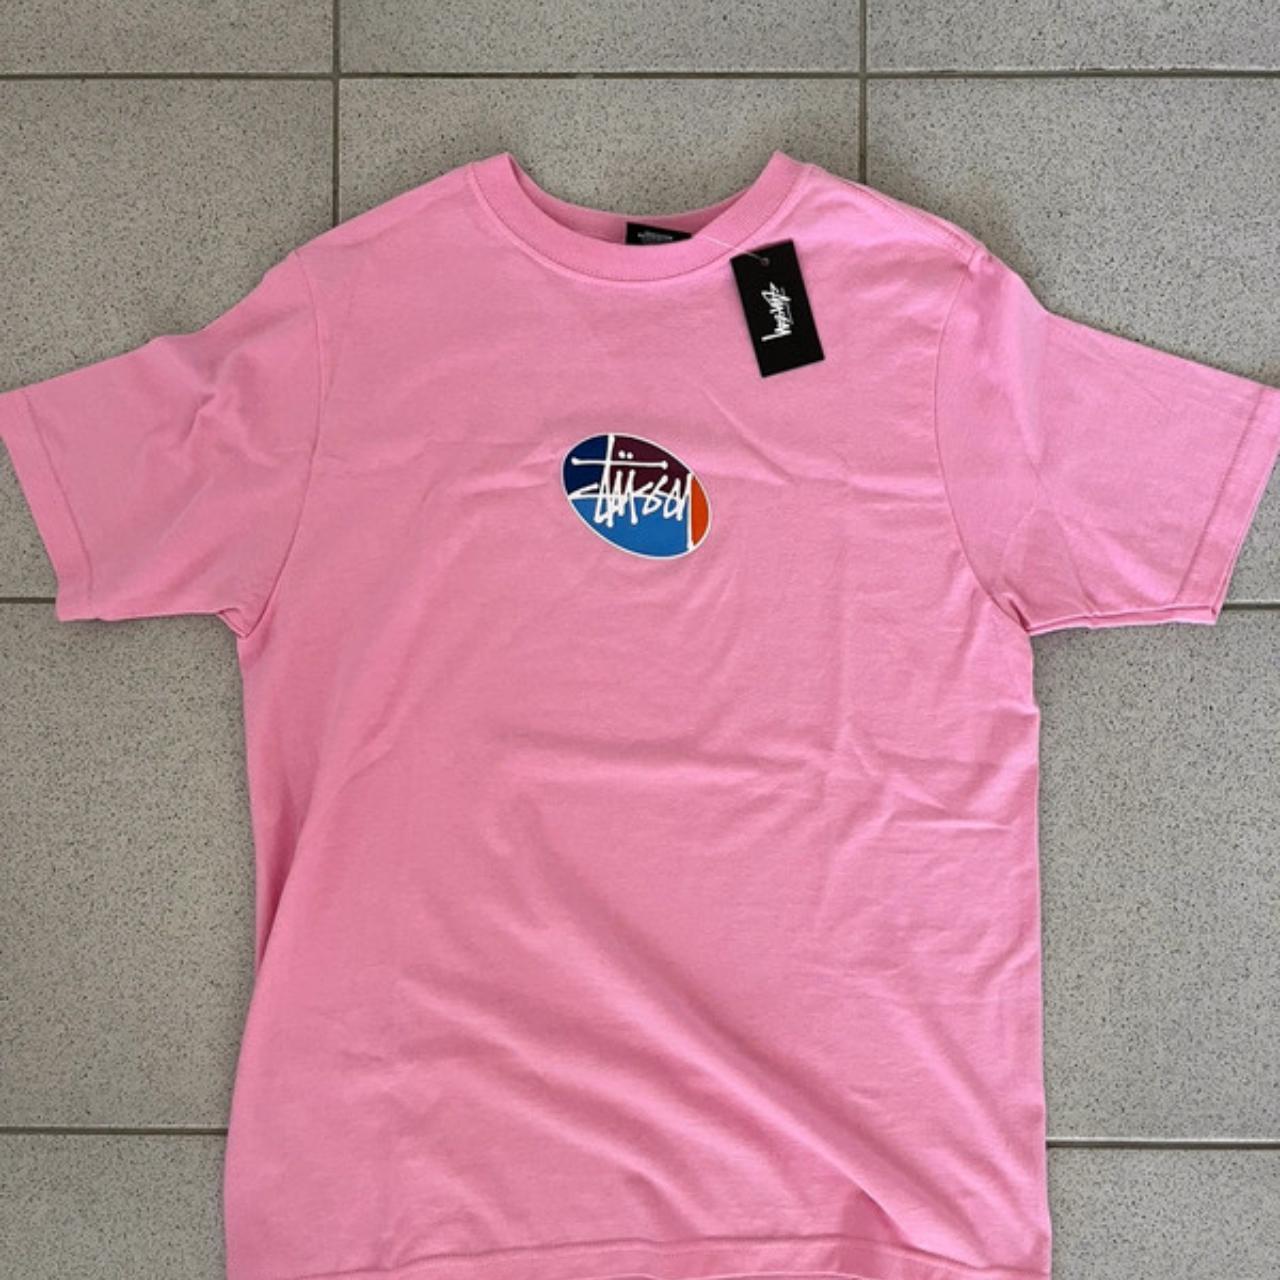 New Stüssy T-shirt -never worn -With tags Size S/36/8 - Depop